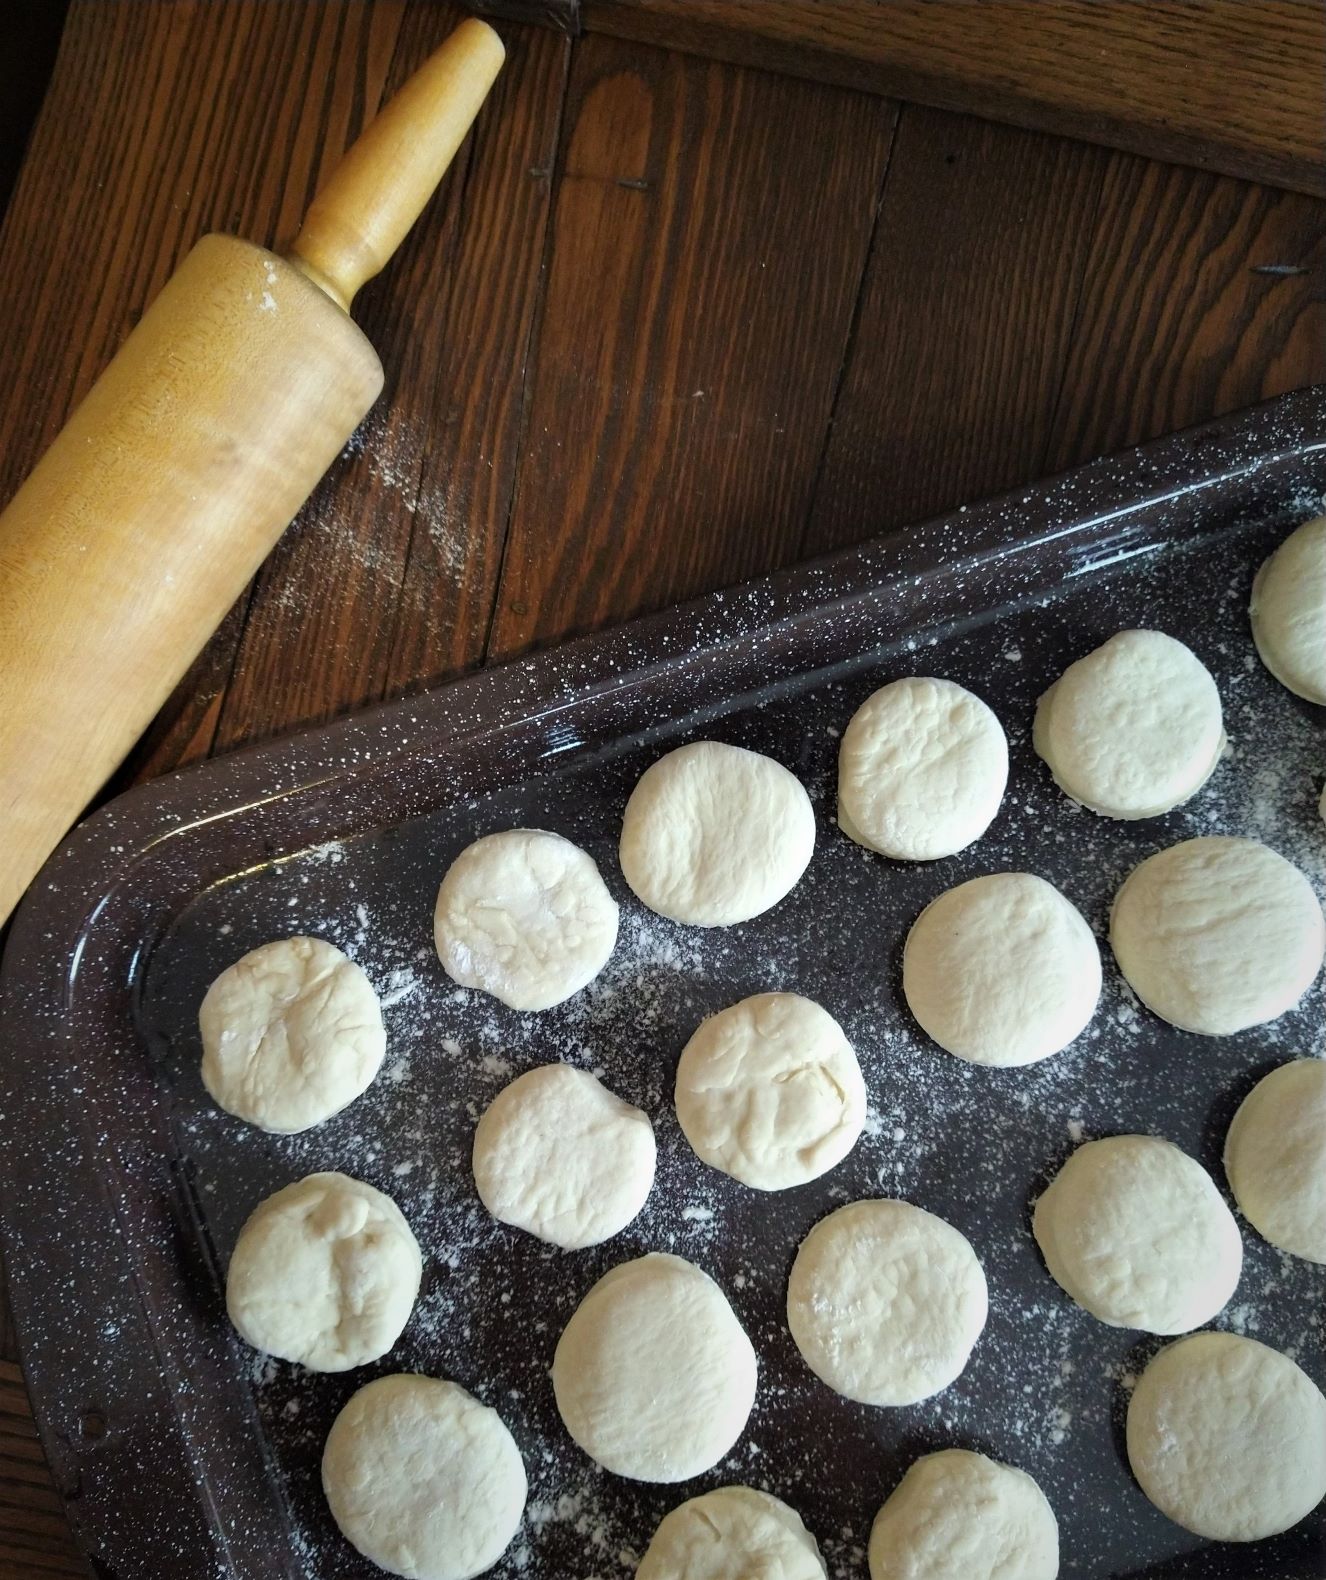 mini no-bake rolls are lined up on baking sheet ready for grilling with a rolling pin nearby